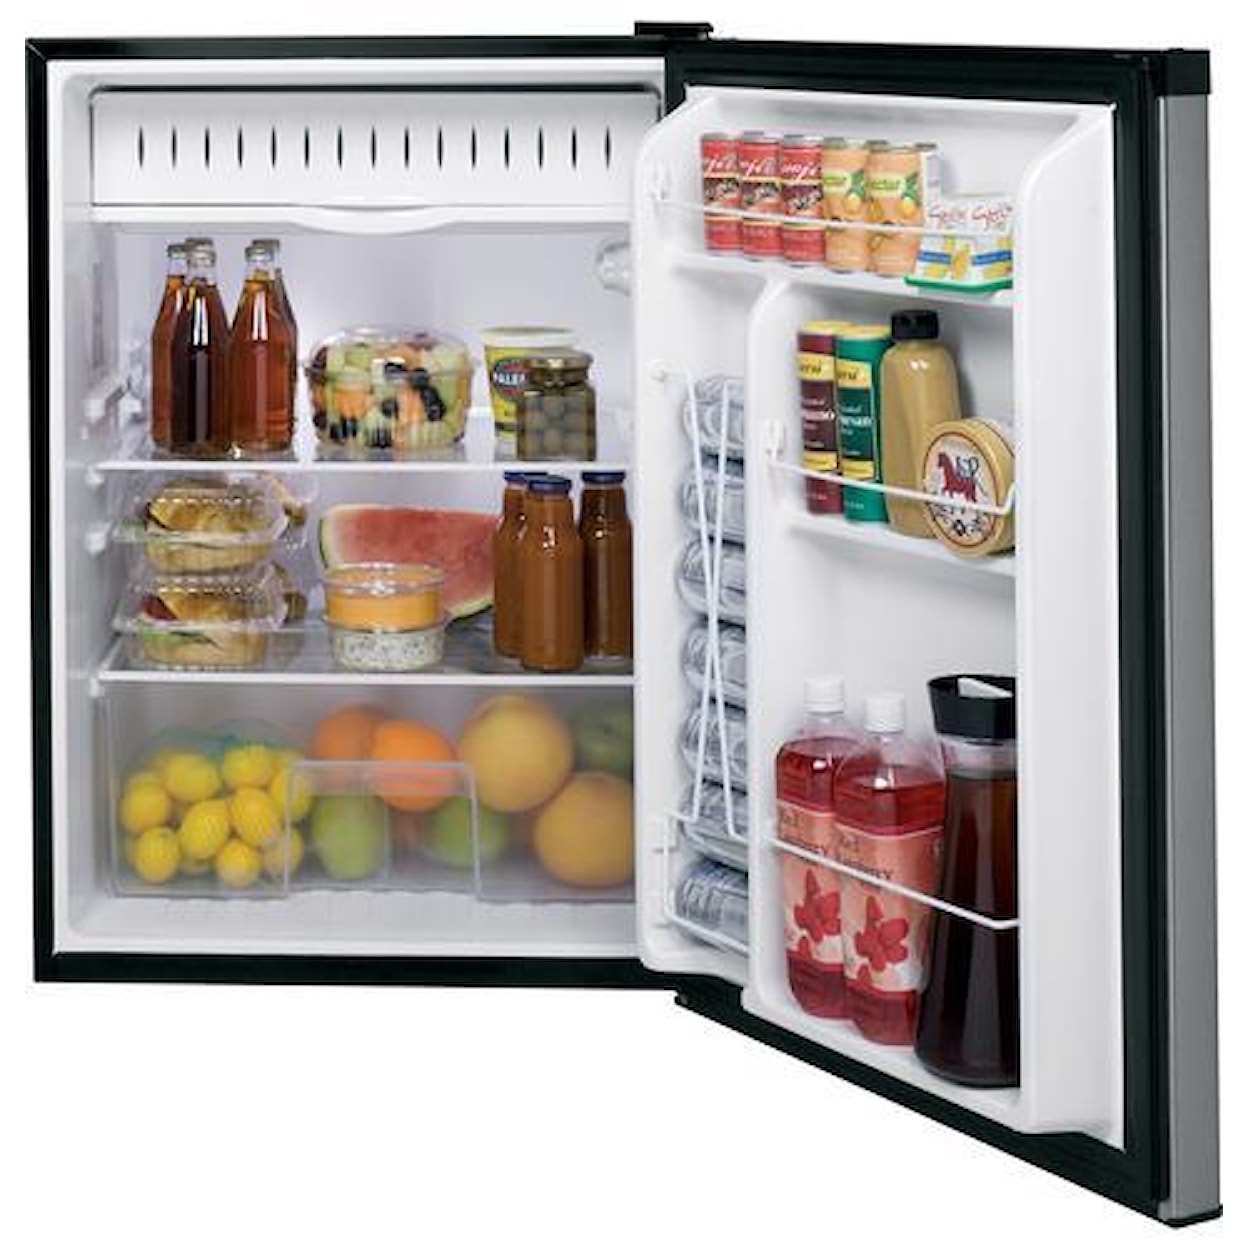 GE Appliances Compact Refrigerators - GE Spacemaker® Compact Refrigerator